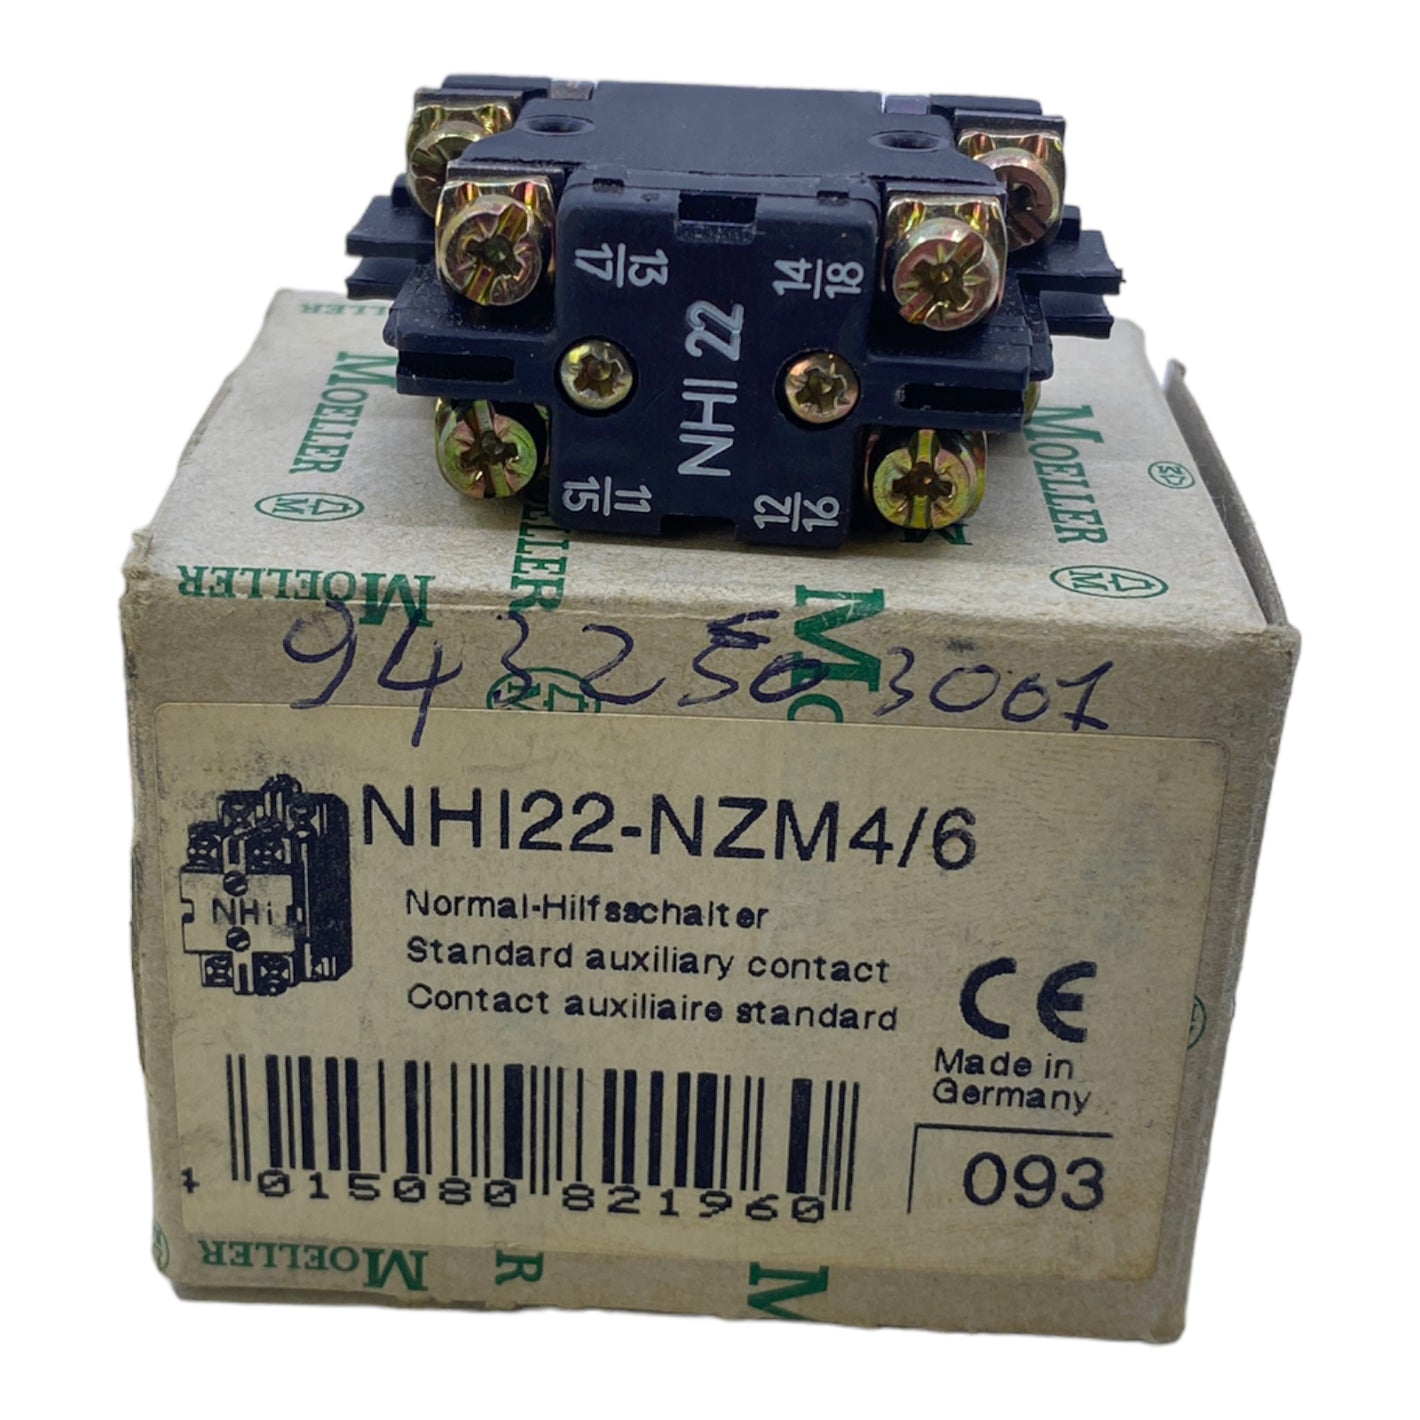 Moeller NHI22-NZM4/6 auxiliary switch